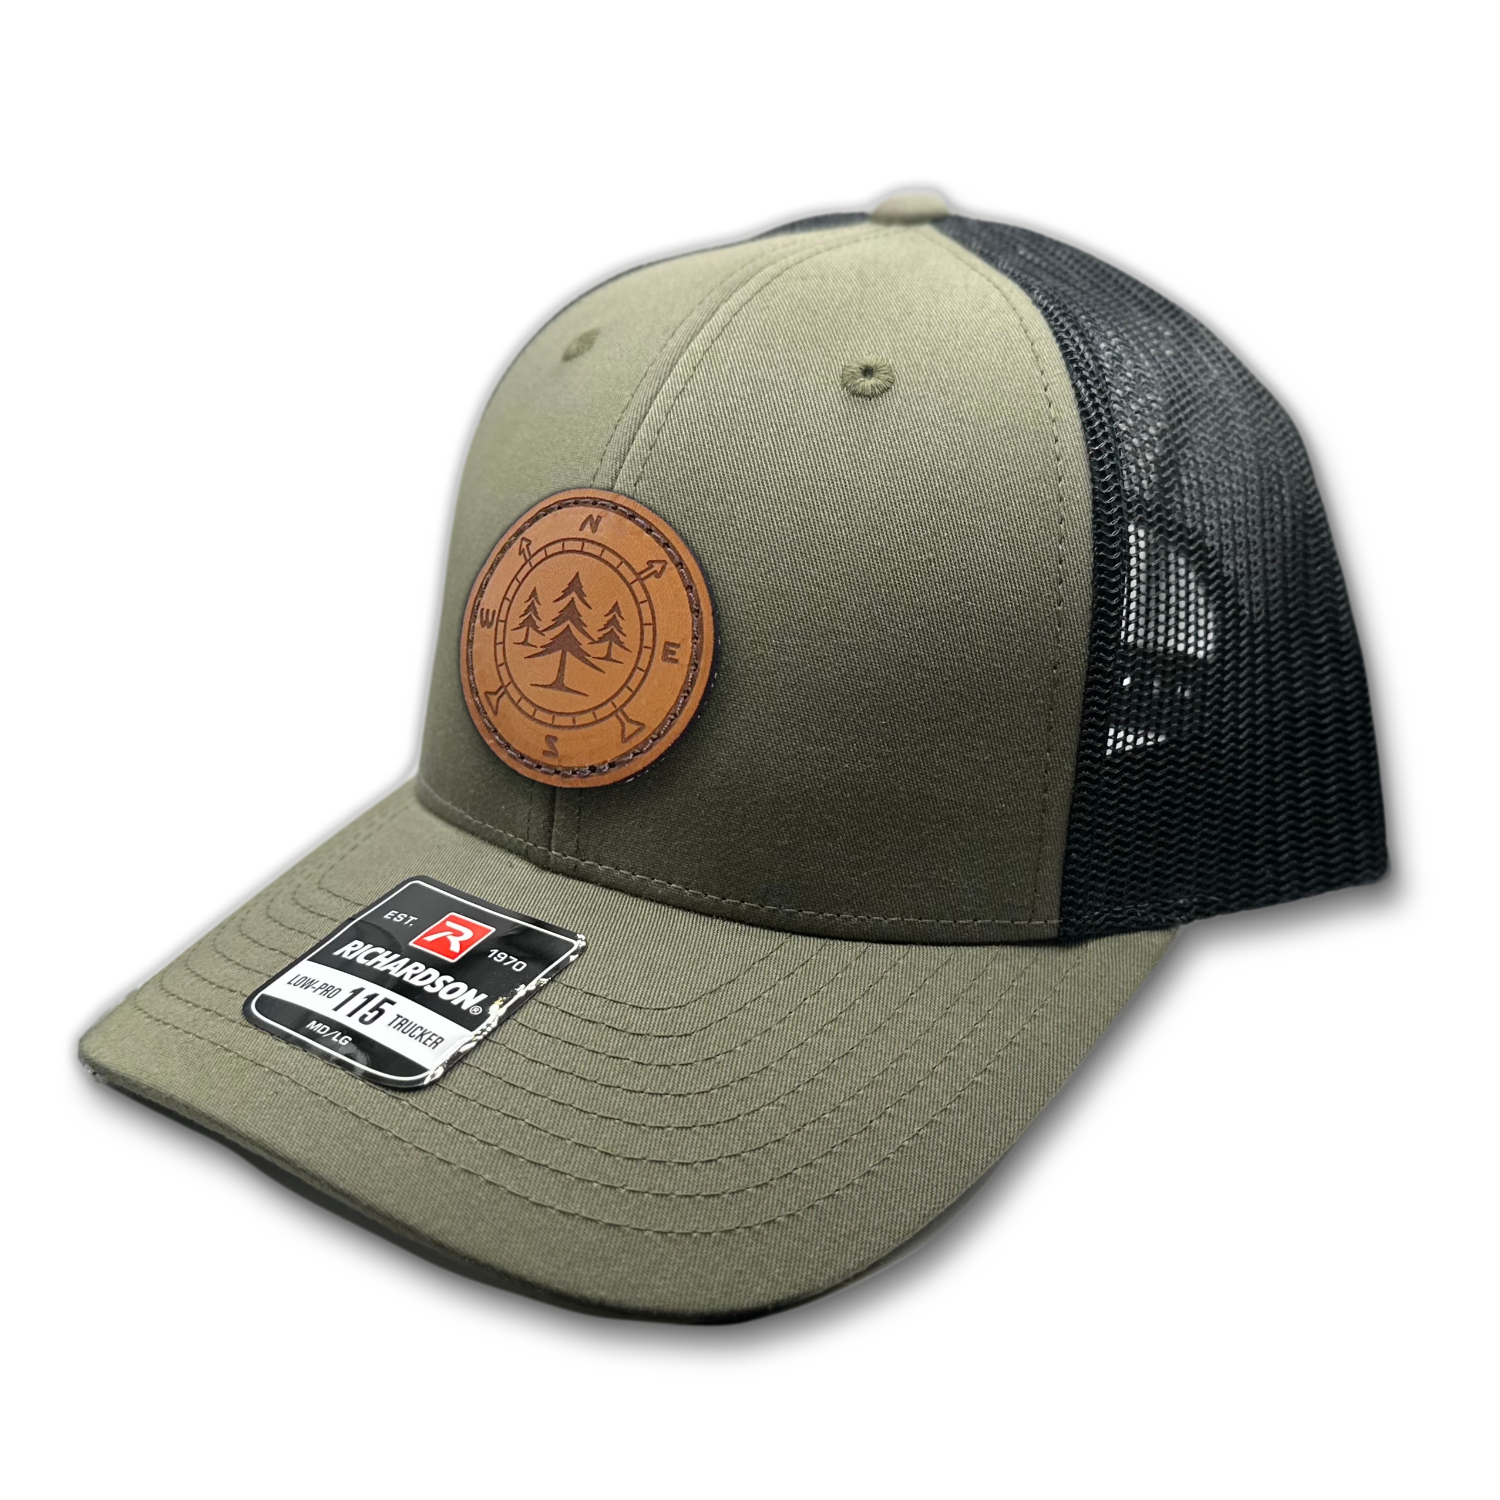 A premium custom leather patch hat named Lost Pines, showcasing a distinctive compass and pine trees design on a circle patch. Handcrafted in the USA, this unique hat features authentic leather stitching on a Loden Green/Black Richardson 115 low profile SnapBack hat. Available in small and m/l sizes in a variety of colors, this hat is inspired by the scenic mountains of Colorado. Perfect for hat enthusiasts seeking high-quality custom leather patch designs.